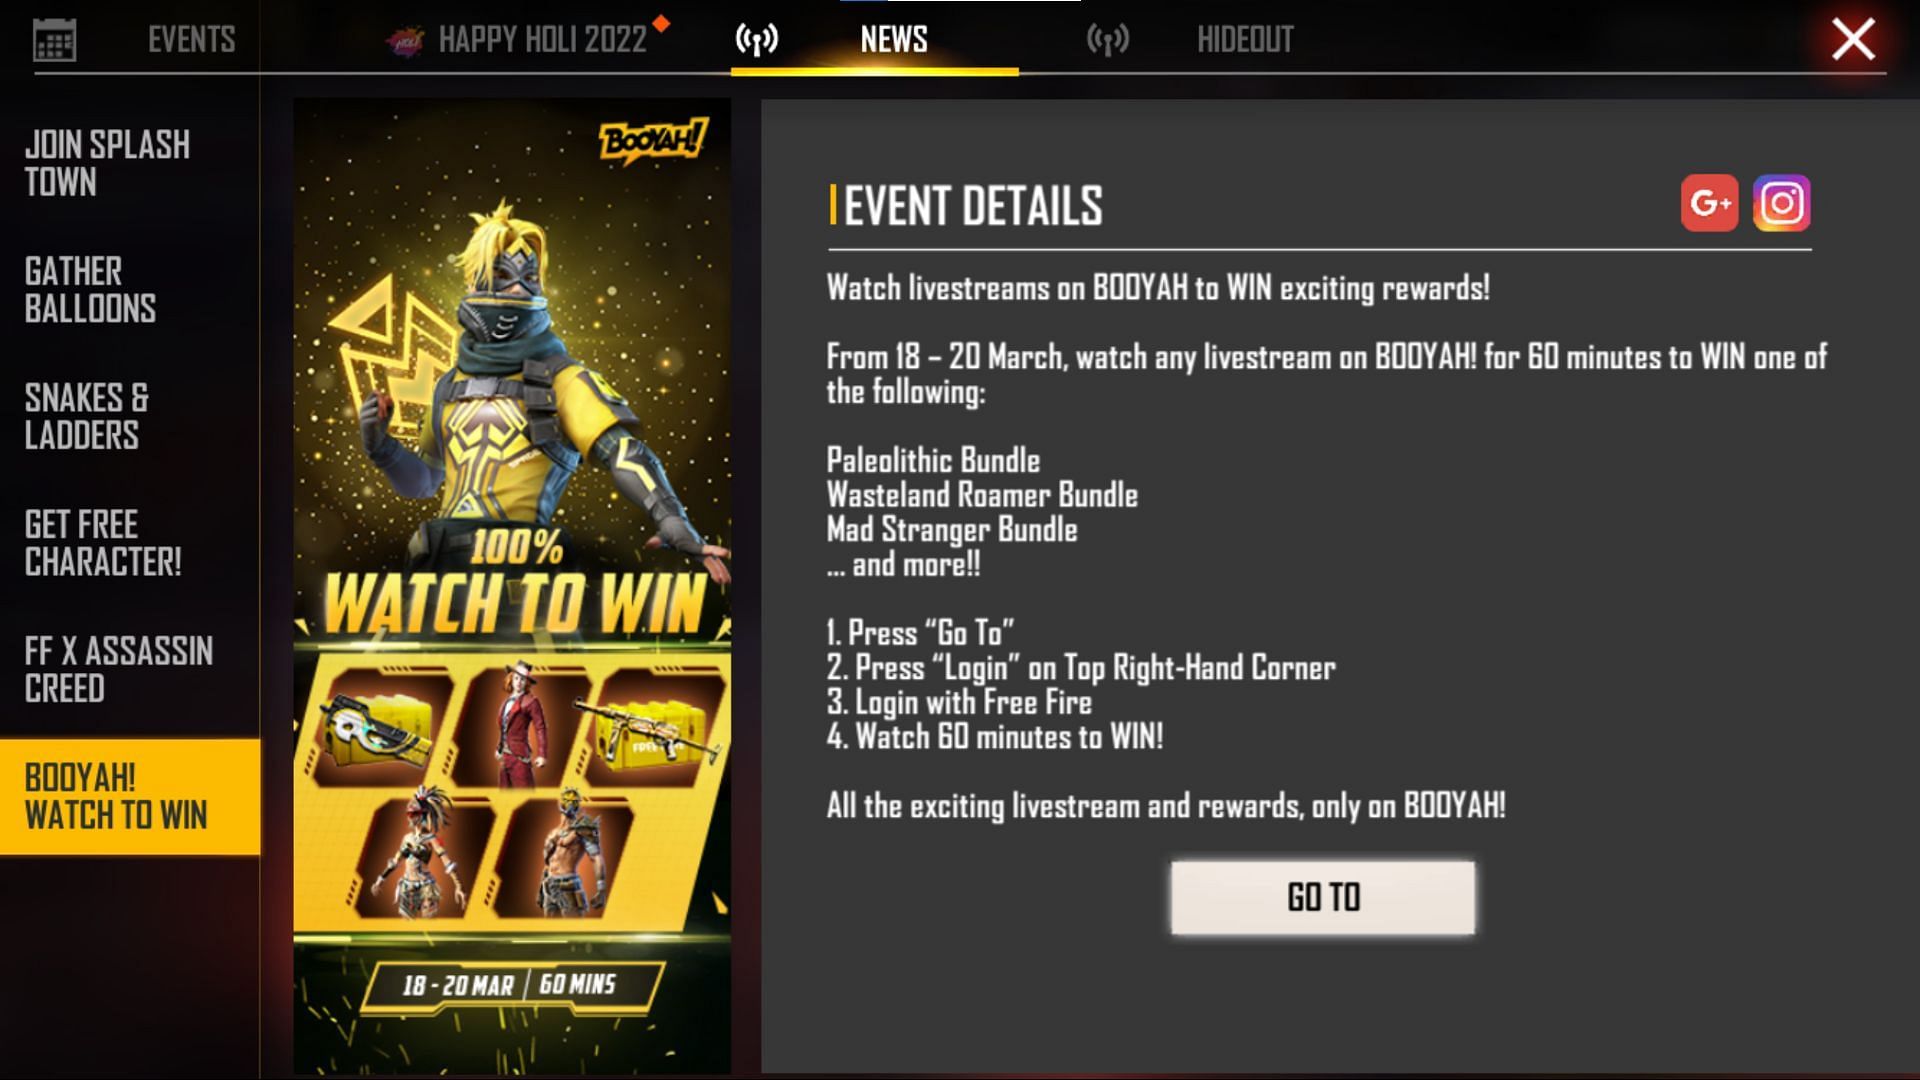 Watch to Win evetns can provide Free Fire MAX diamonds as well (Image via Garena)